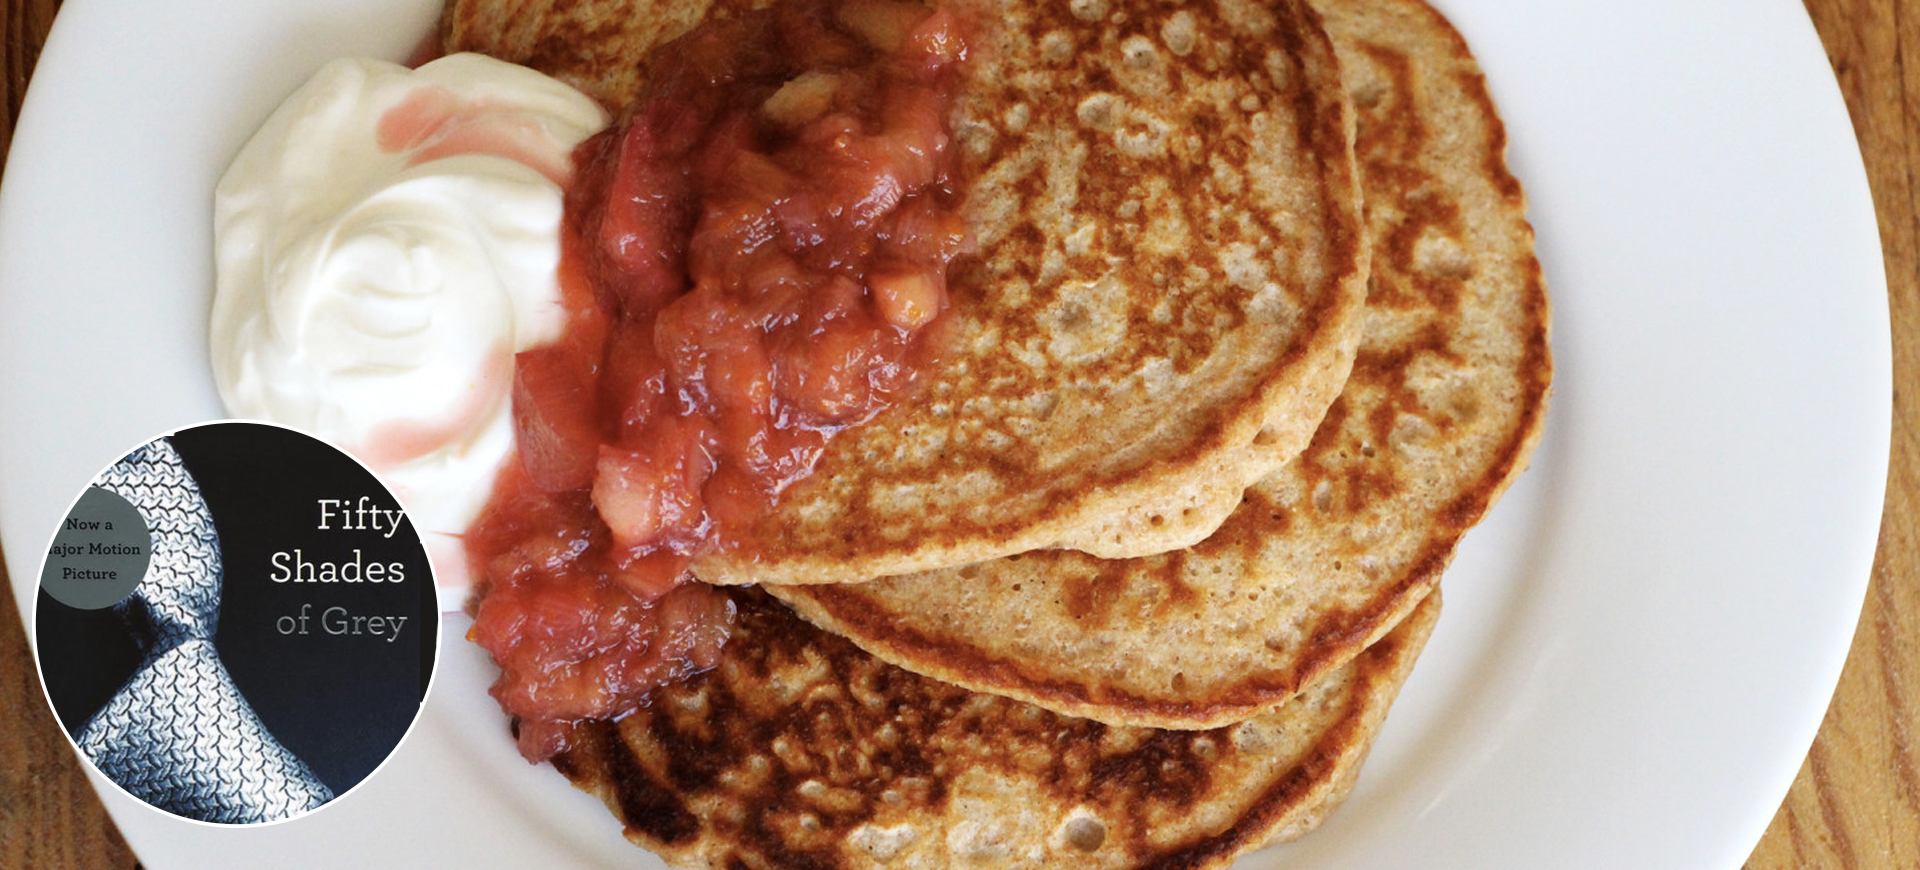 Fifty Shades of Grey and Multigrain Pancakes with Rhubarb-Orange Compote and Greek Yogurt.